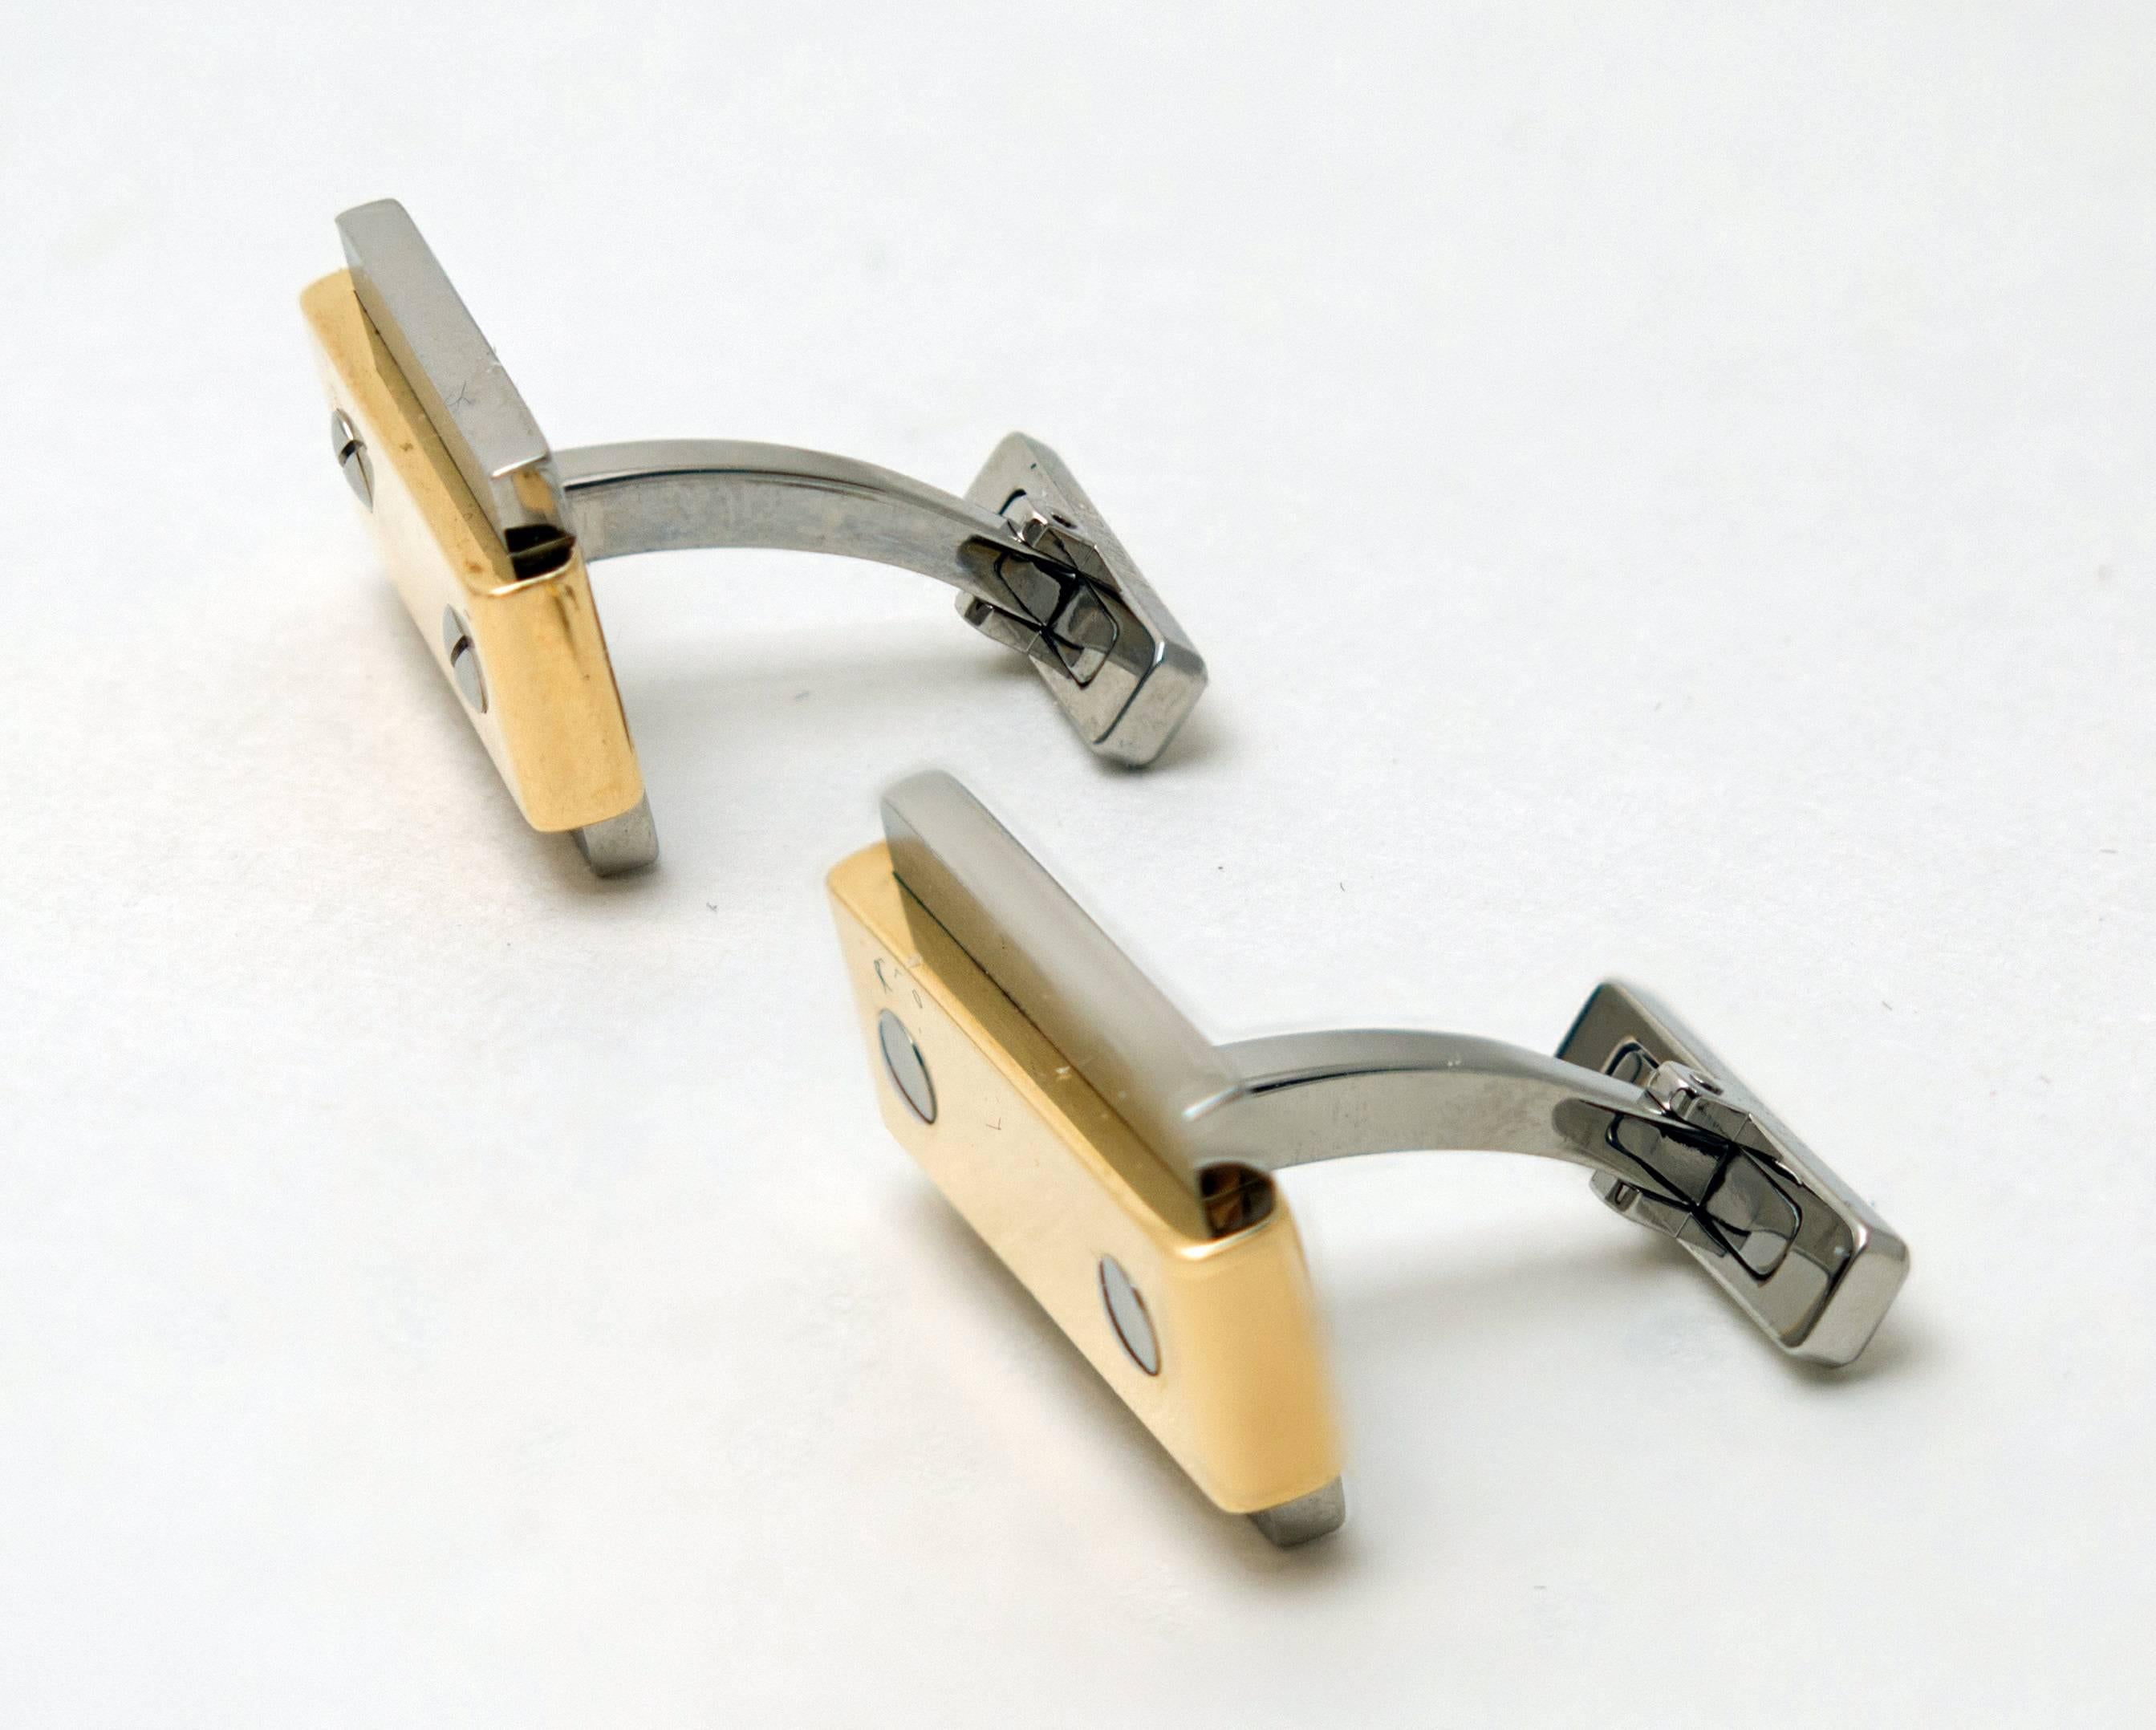 A pair of Cartier Santos cufflinks crafted in 18 K yellow gold and stainless steel / acier. The cufflinks featuring the classic Santos design, with a yellow gold band and the distinctive screws, and would be the perfect complement to the Santos